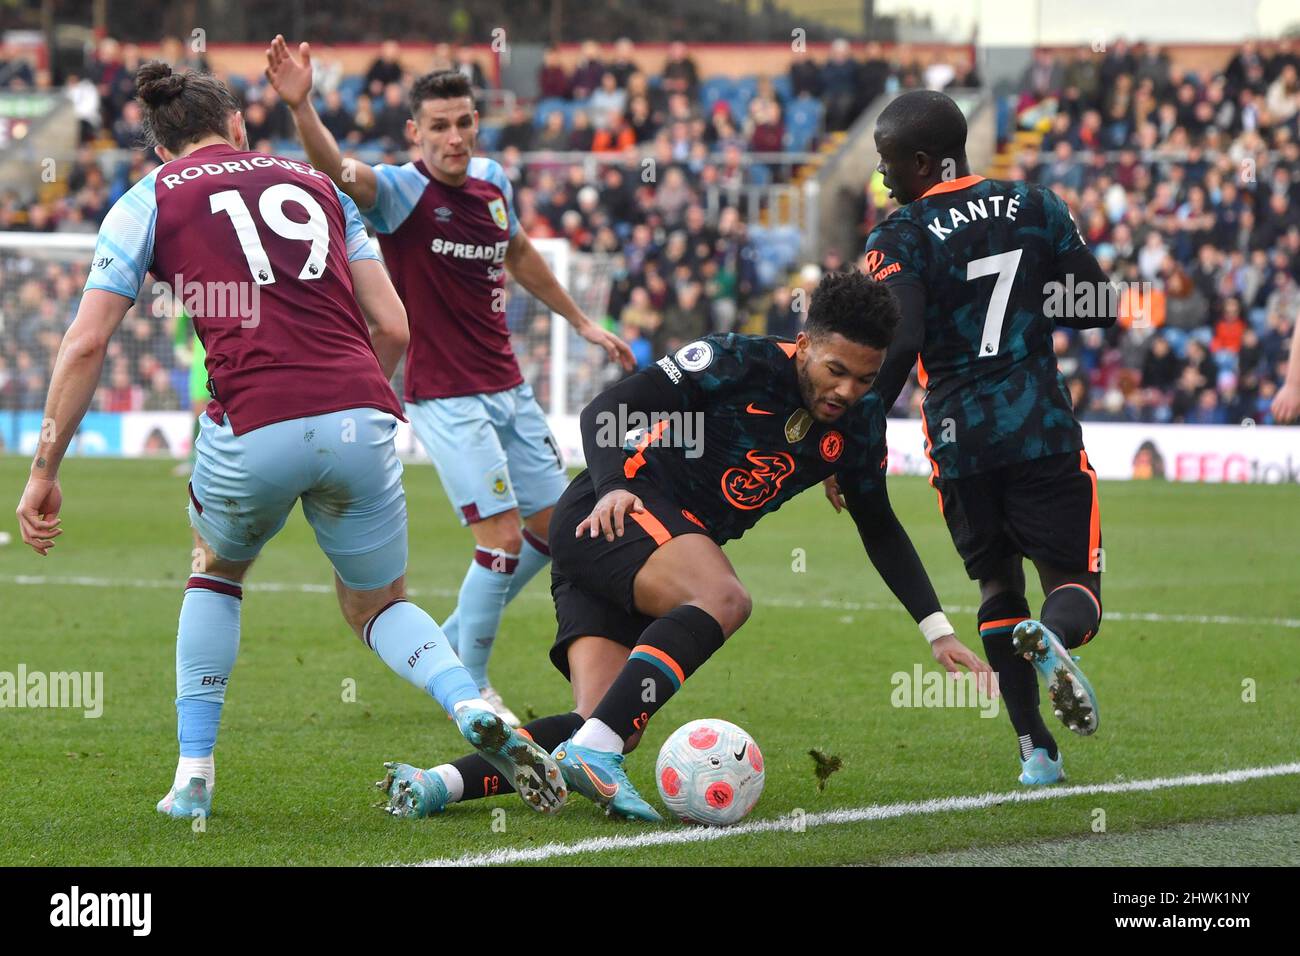 Chelsea’s Reece James and Burnley’s Jay Rodriguez battle for the ball during the Premier League match between Burnley FC and Chelsea FC at Turf Moor, Burnley, UK. Picture date: Saturday March 5, 2022. Photo credit should read: Anthony Devlin Stock Photo